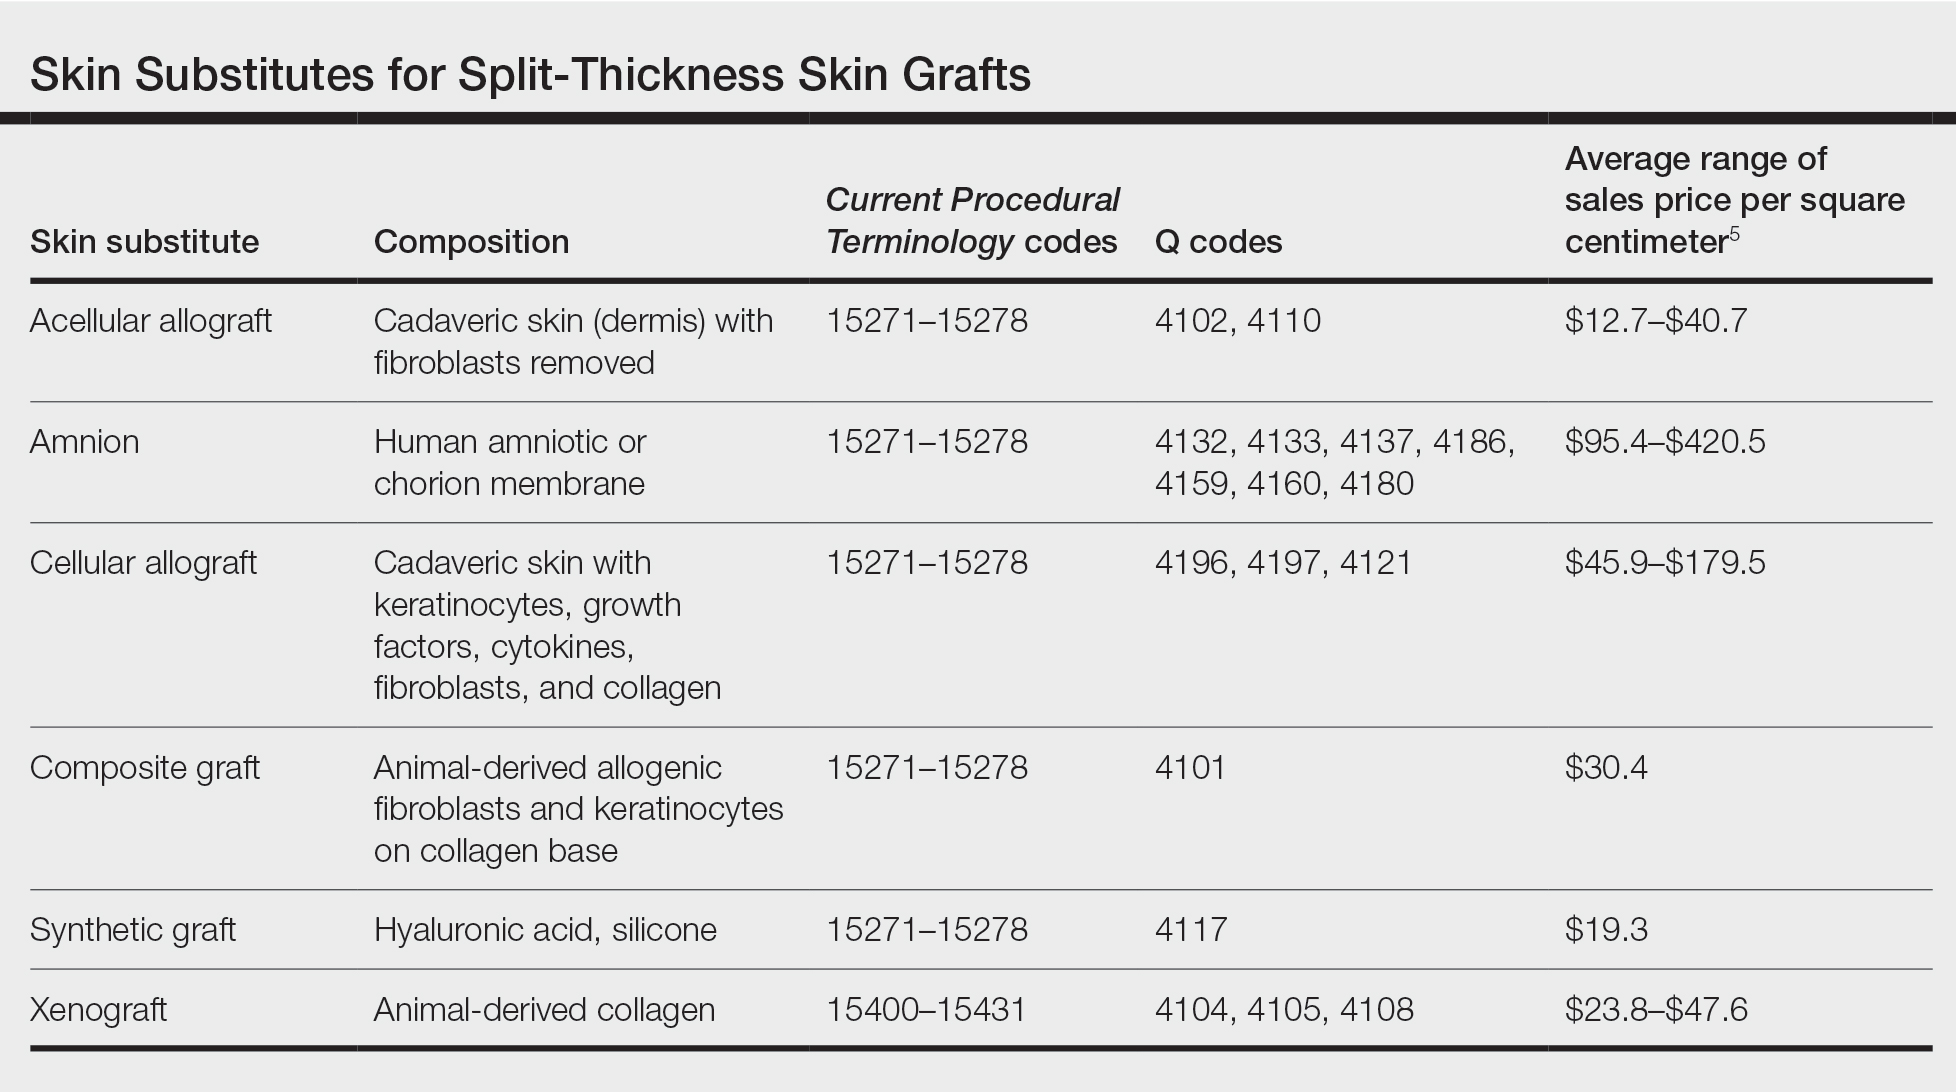 Skin Substitutes for Split-Thickness Skin Grafts